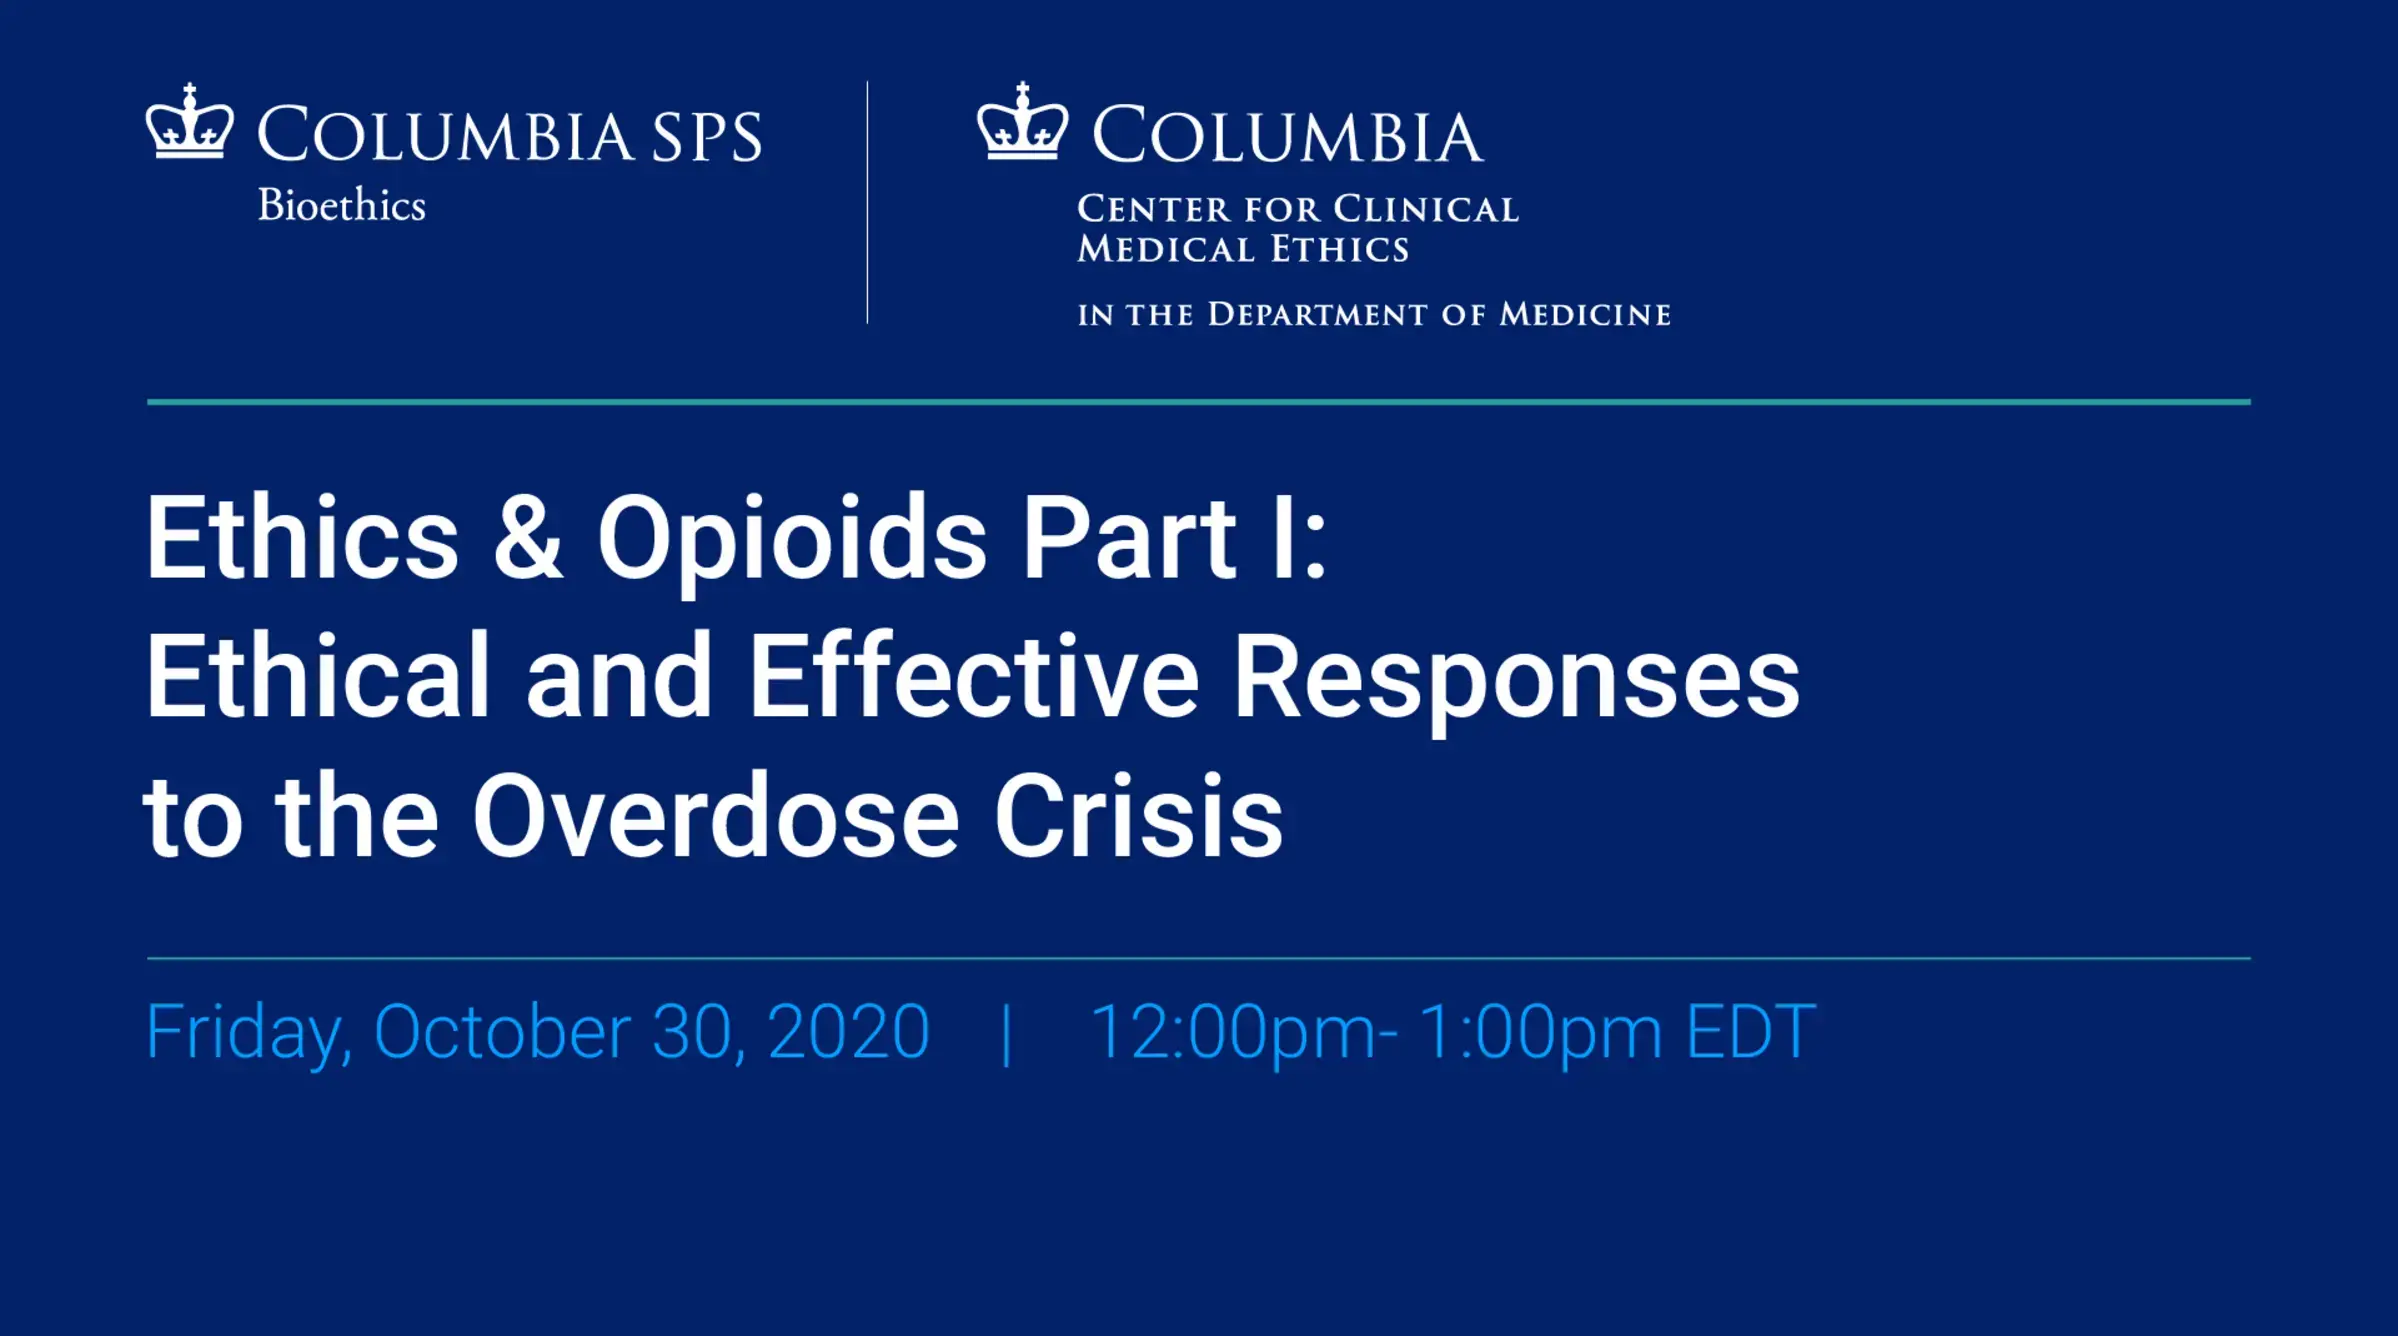 A video cover for a recording of "Ethics & Opioids Part I: Ethical and Effective Responses to the Overdose Crisis."